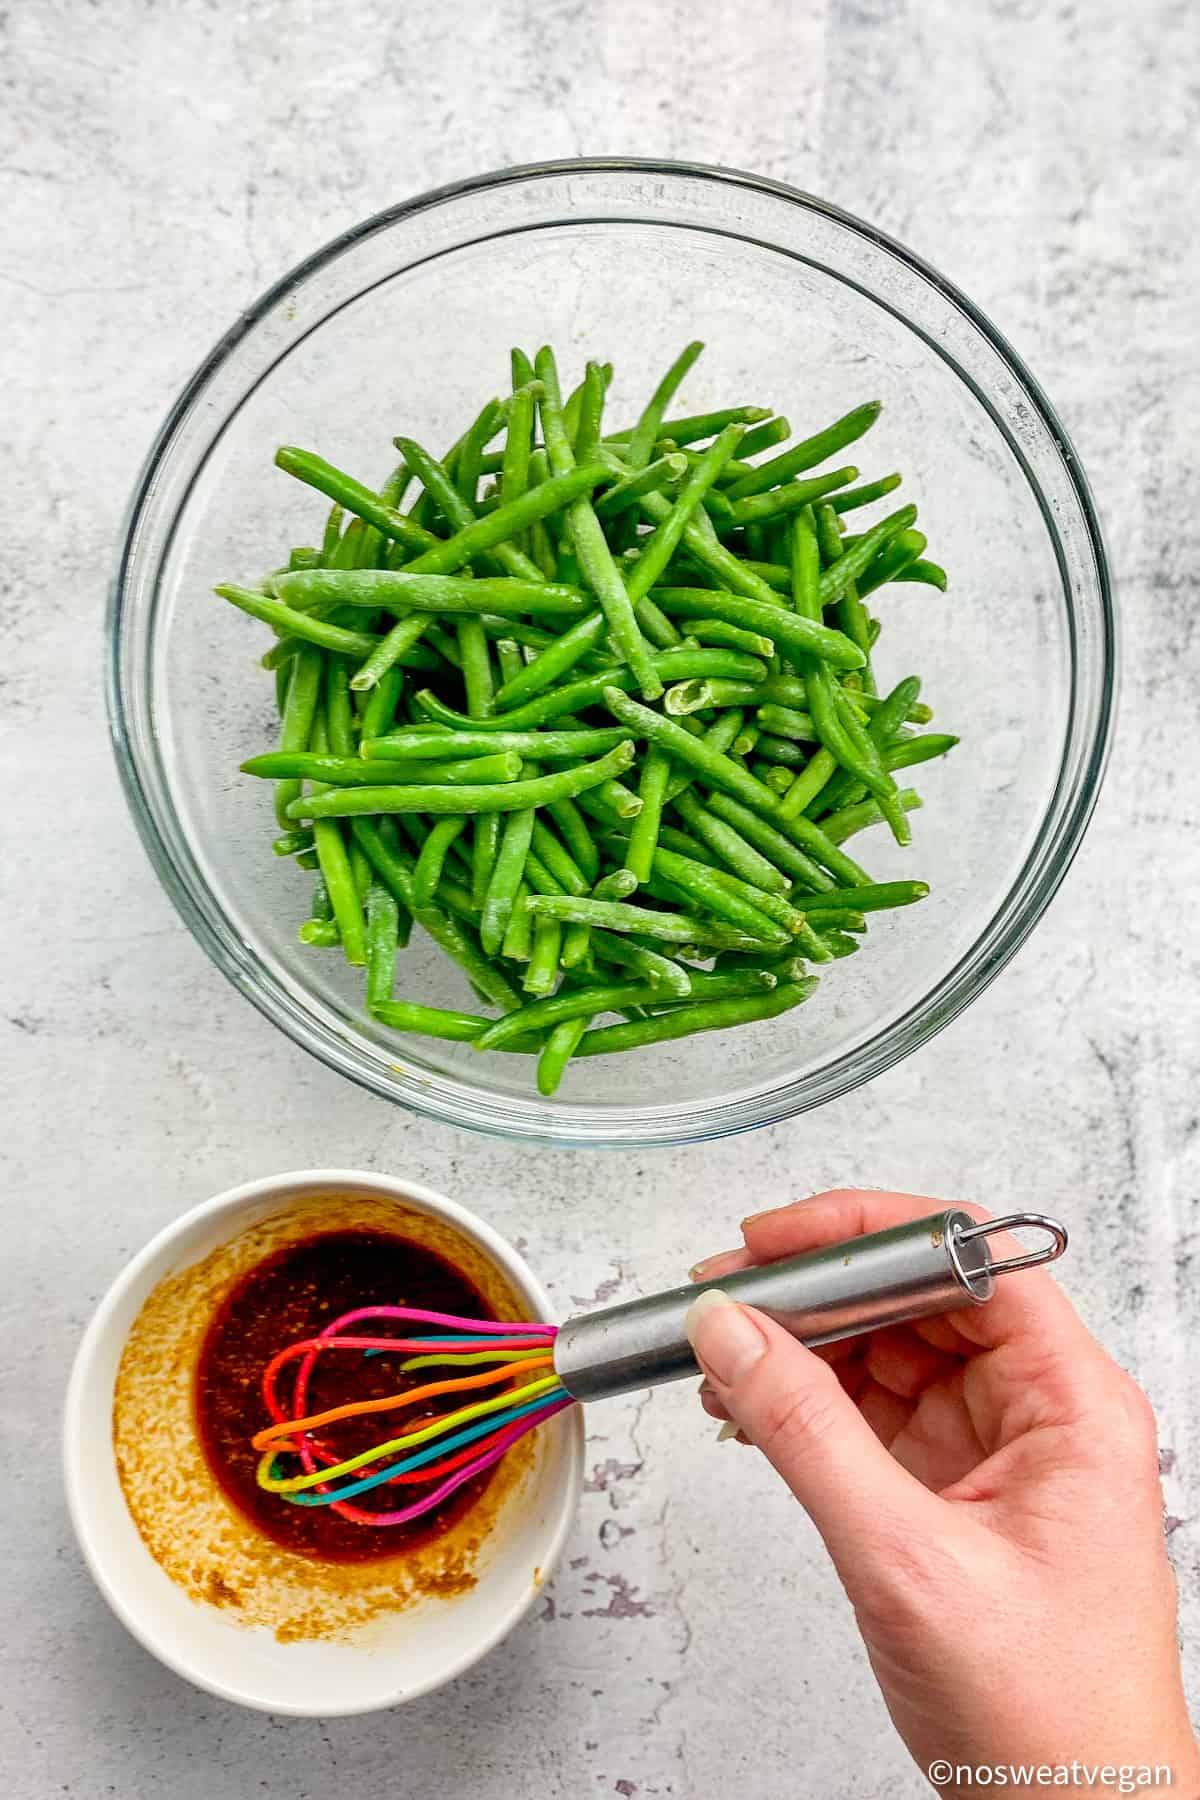 Frozen green beans in a large bowl next to a small bowl with a hand whisking seasoning.